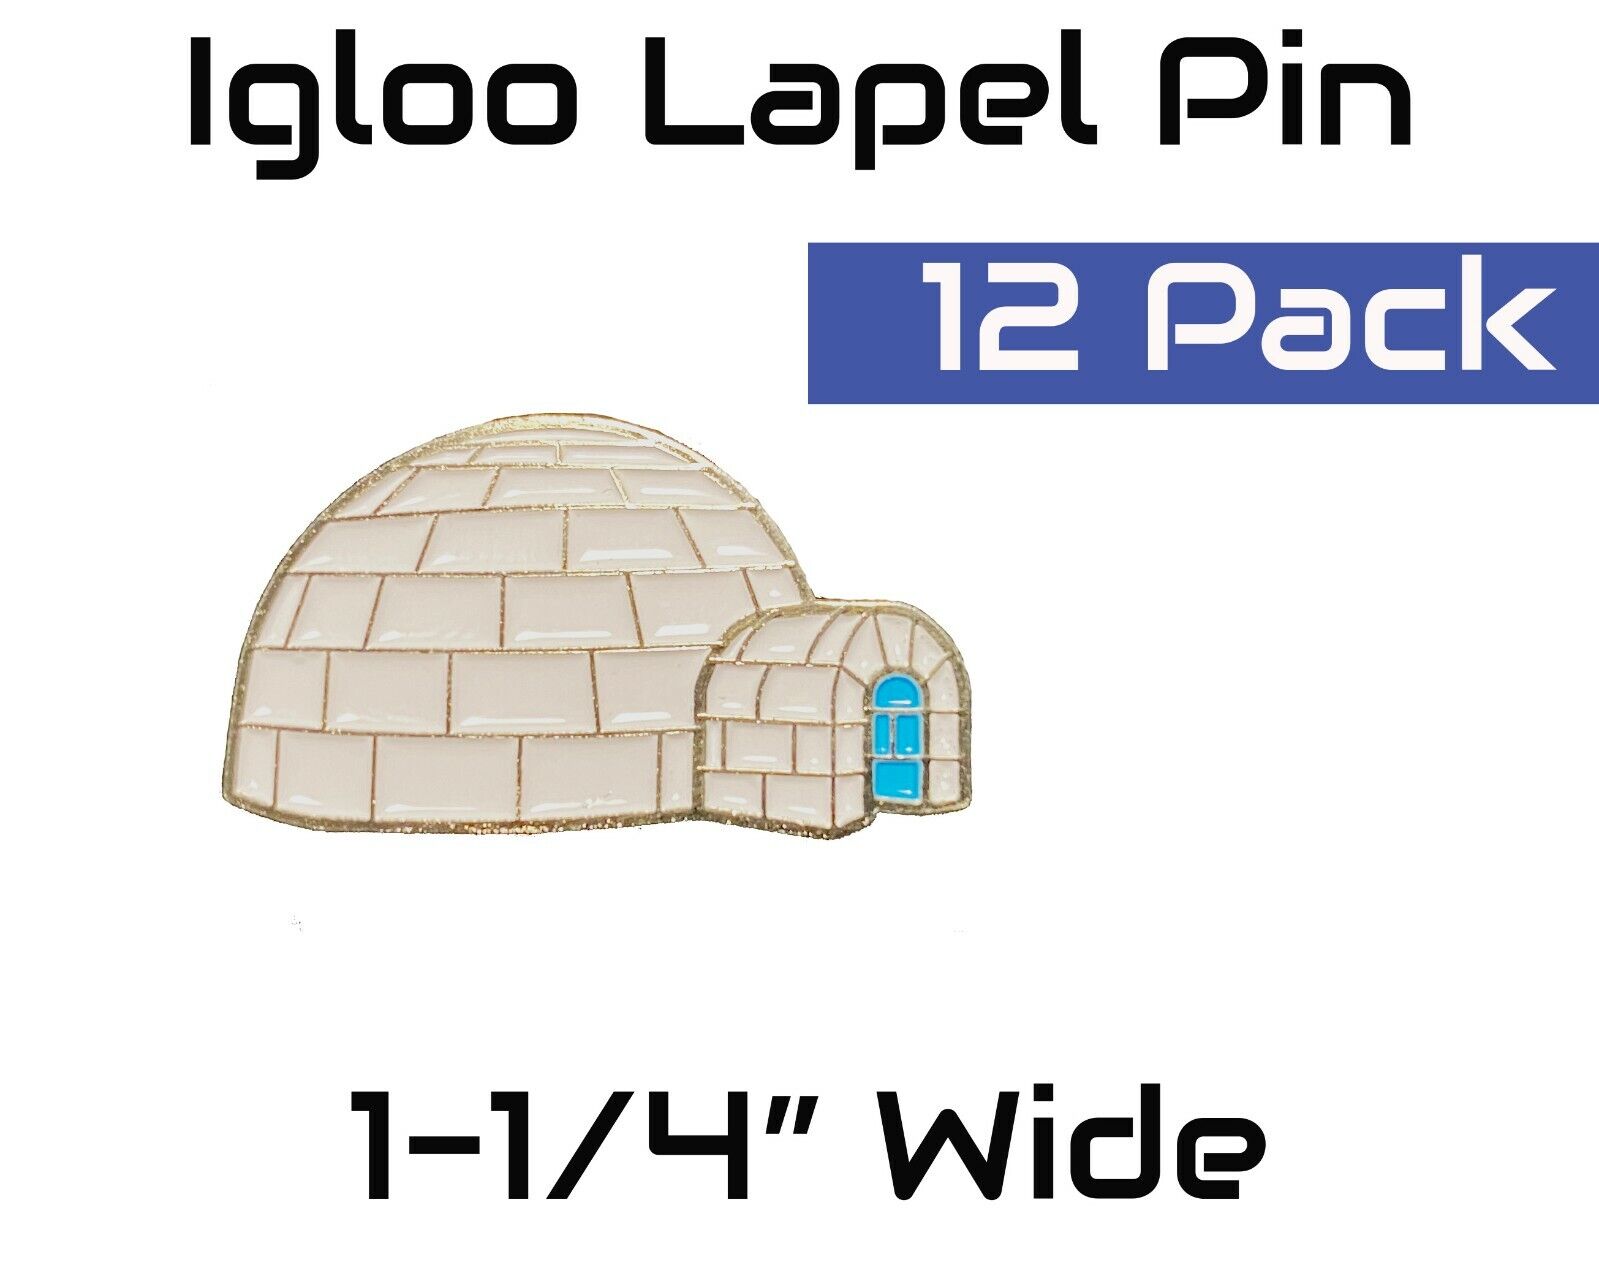 Igloo Lapel Pin Clearance SALE Very popular! Limited time Pack 12